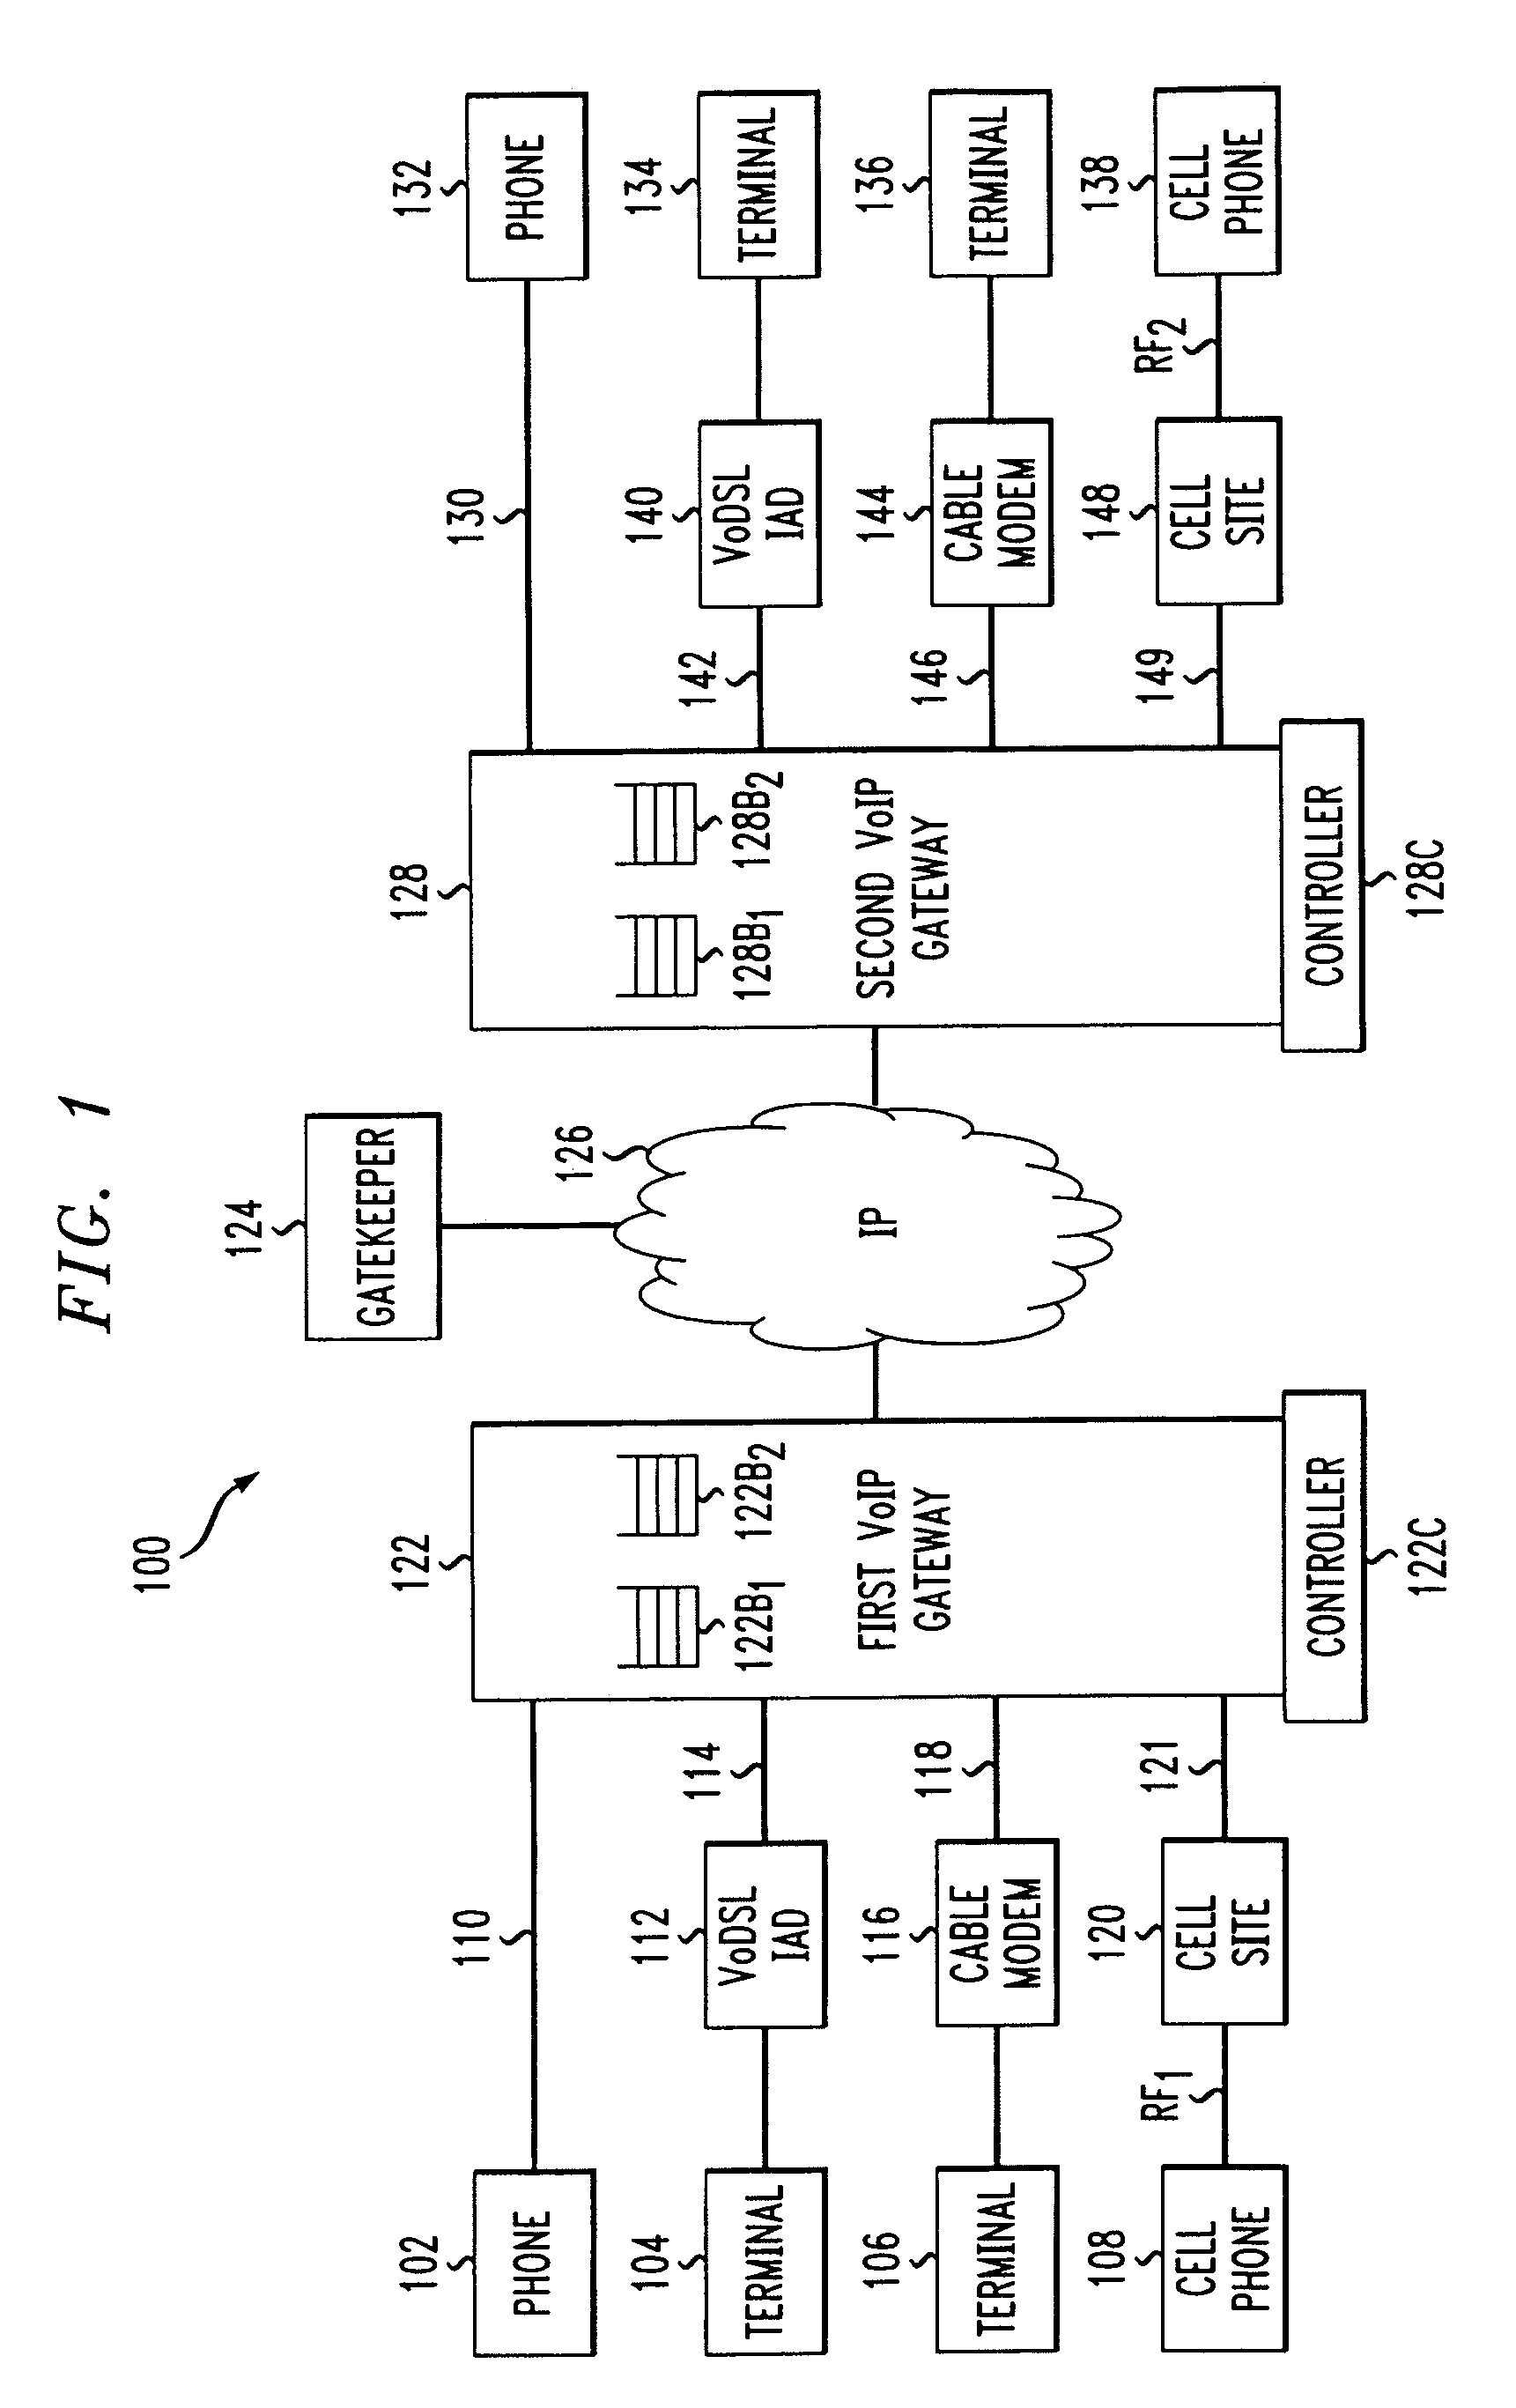 Method and apparatus for jitter and frame erasure correction in packetized voice communication systems